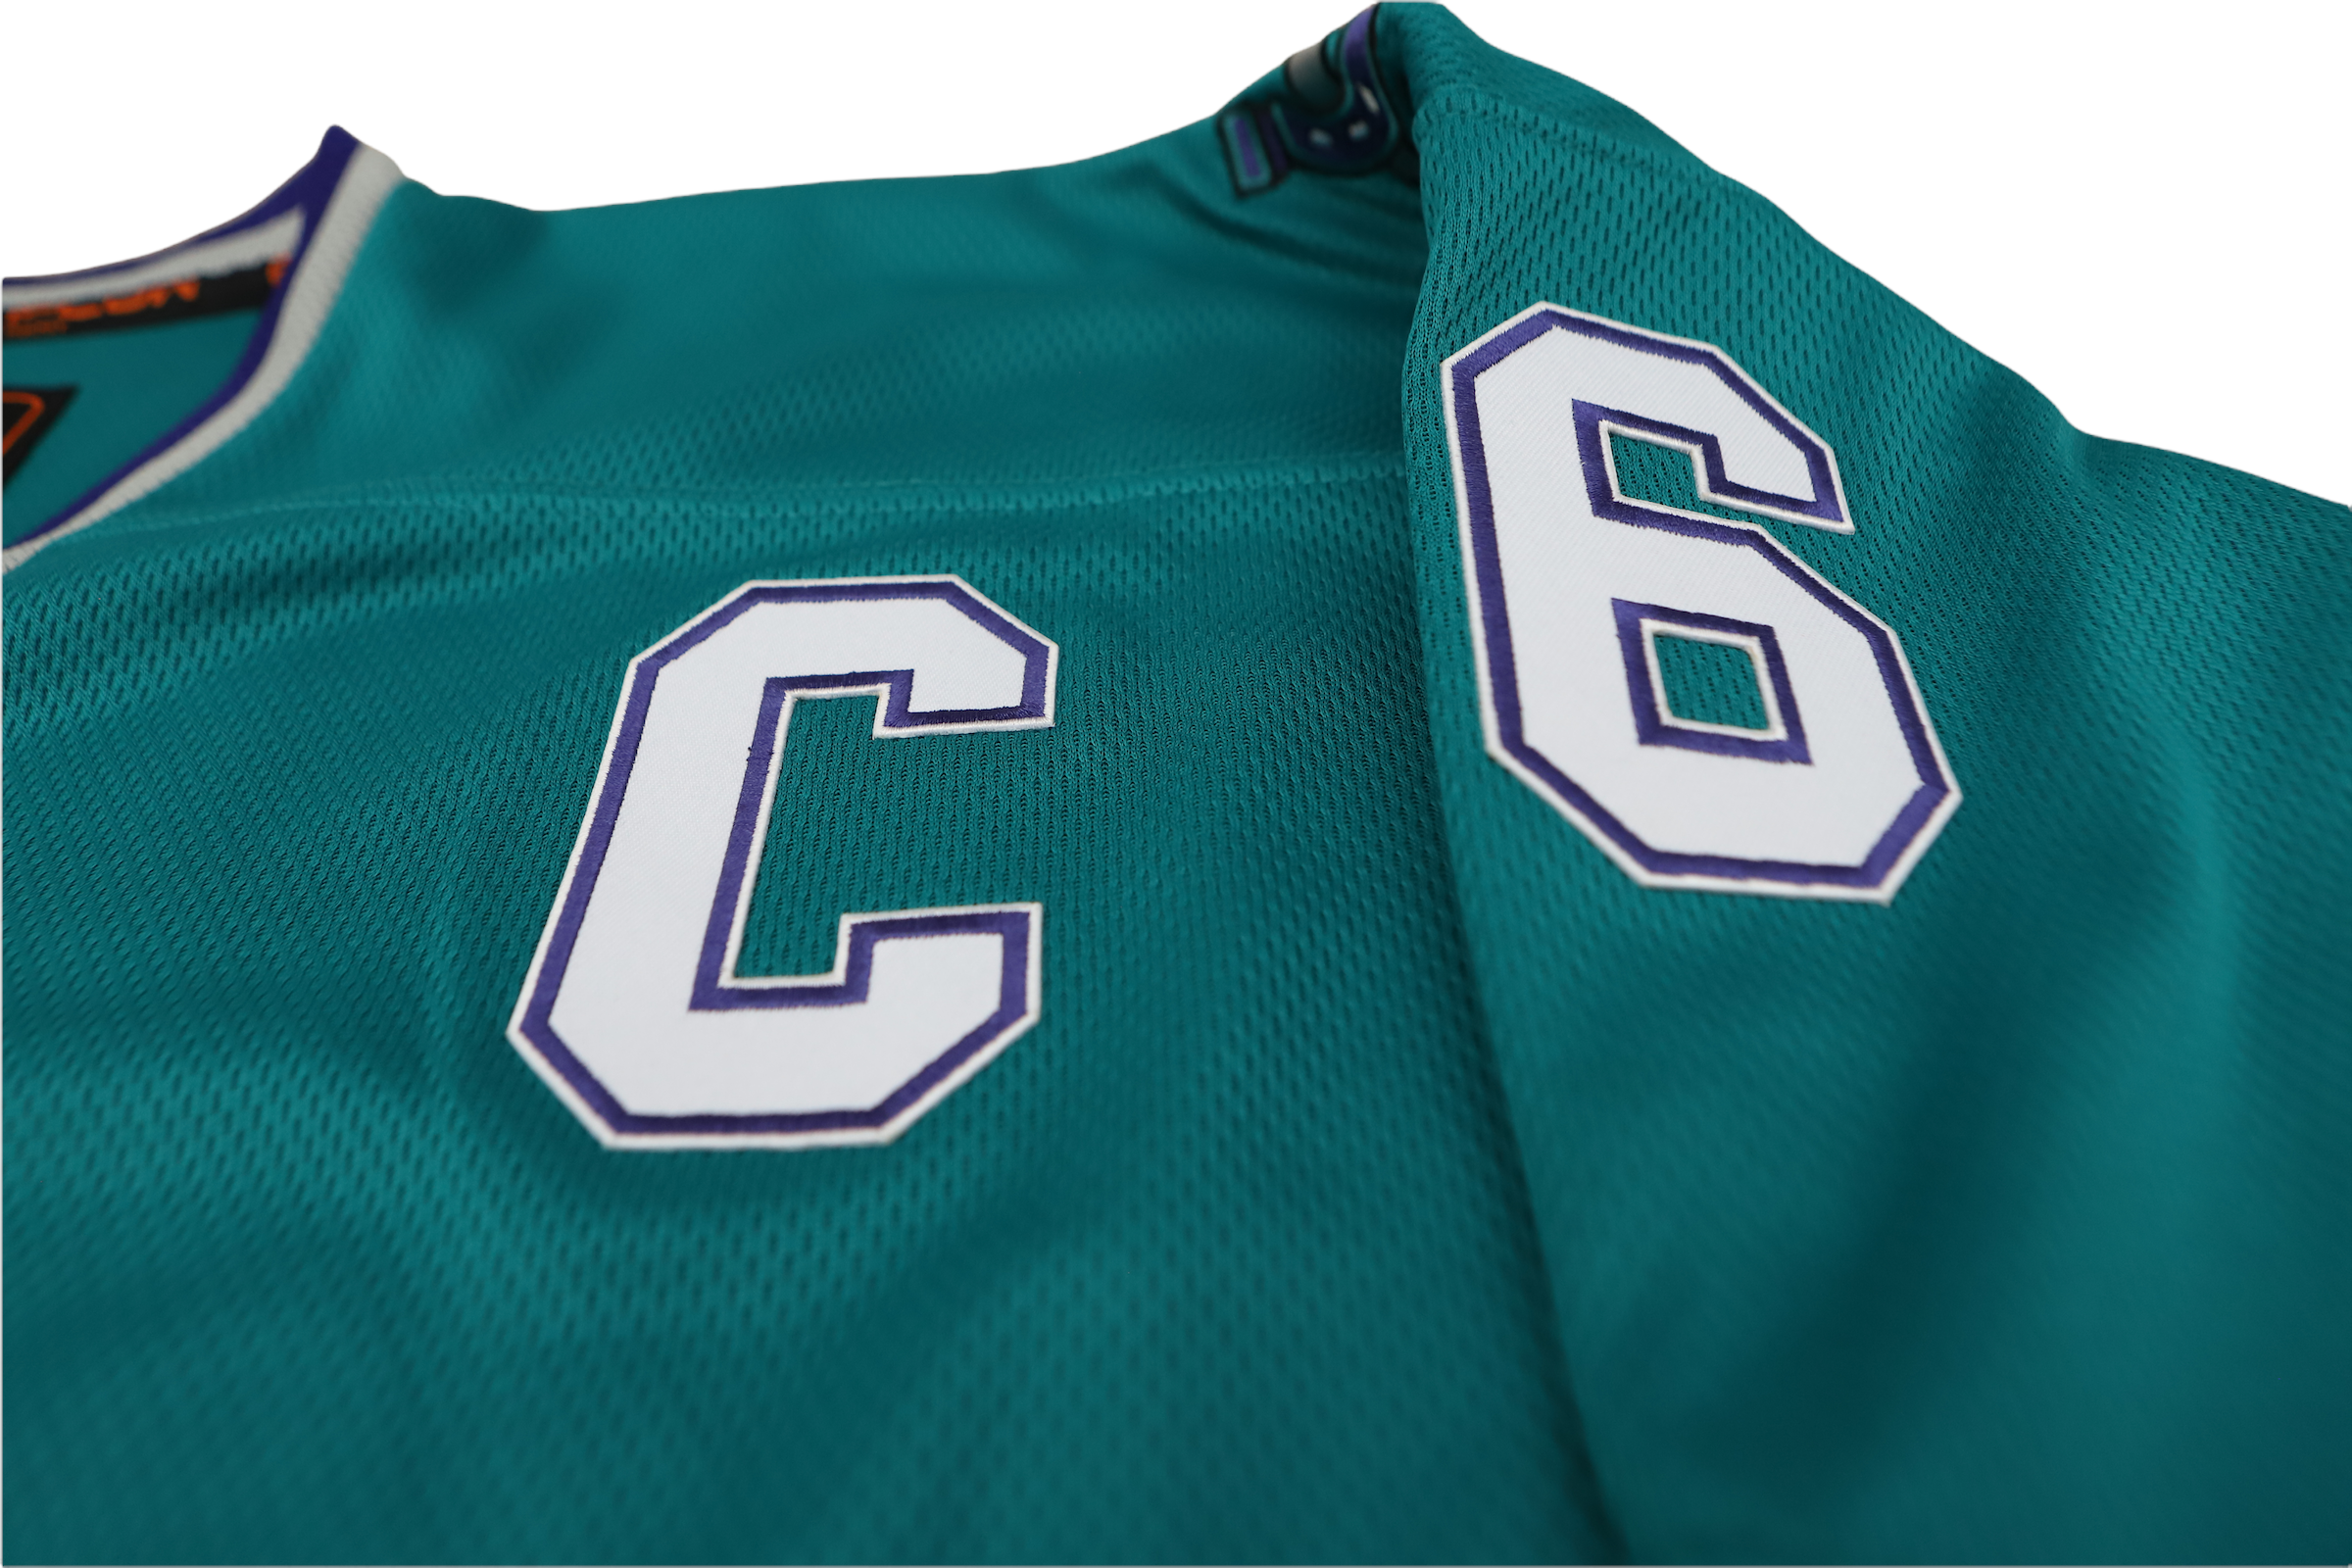 Charlotte Checkers will wear teal Hornets jerseys on Nov. 29